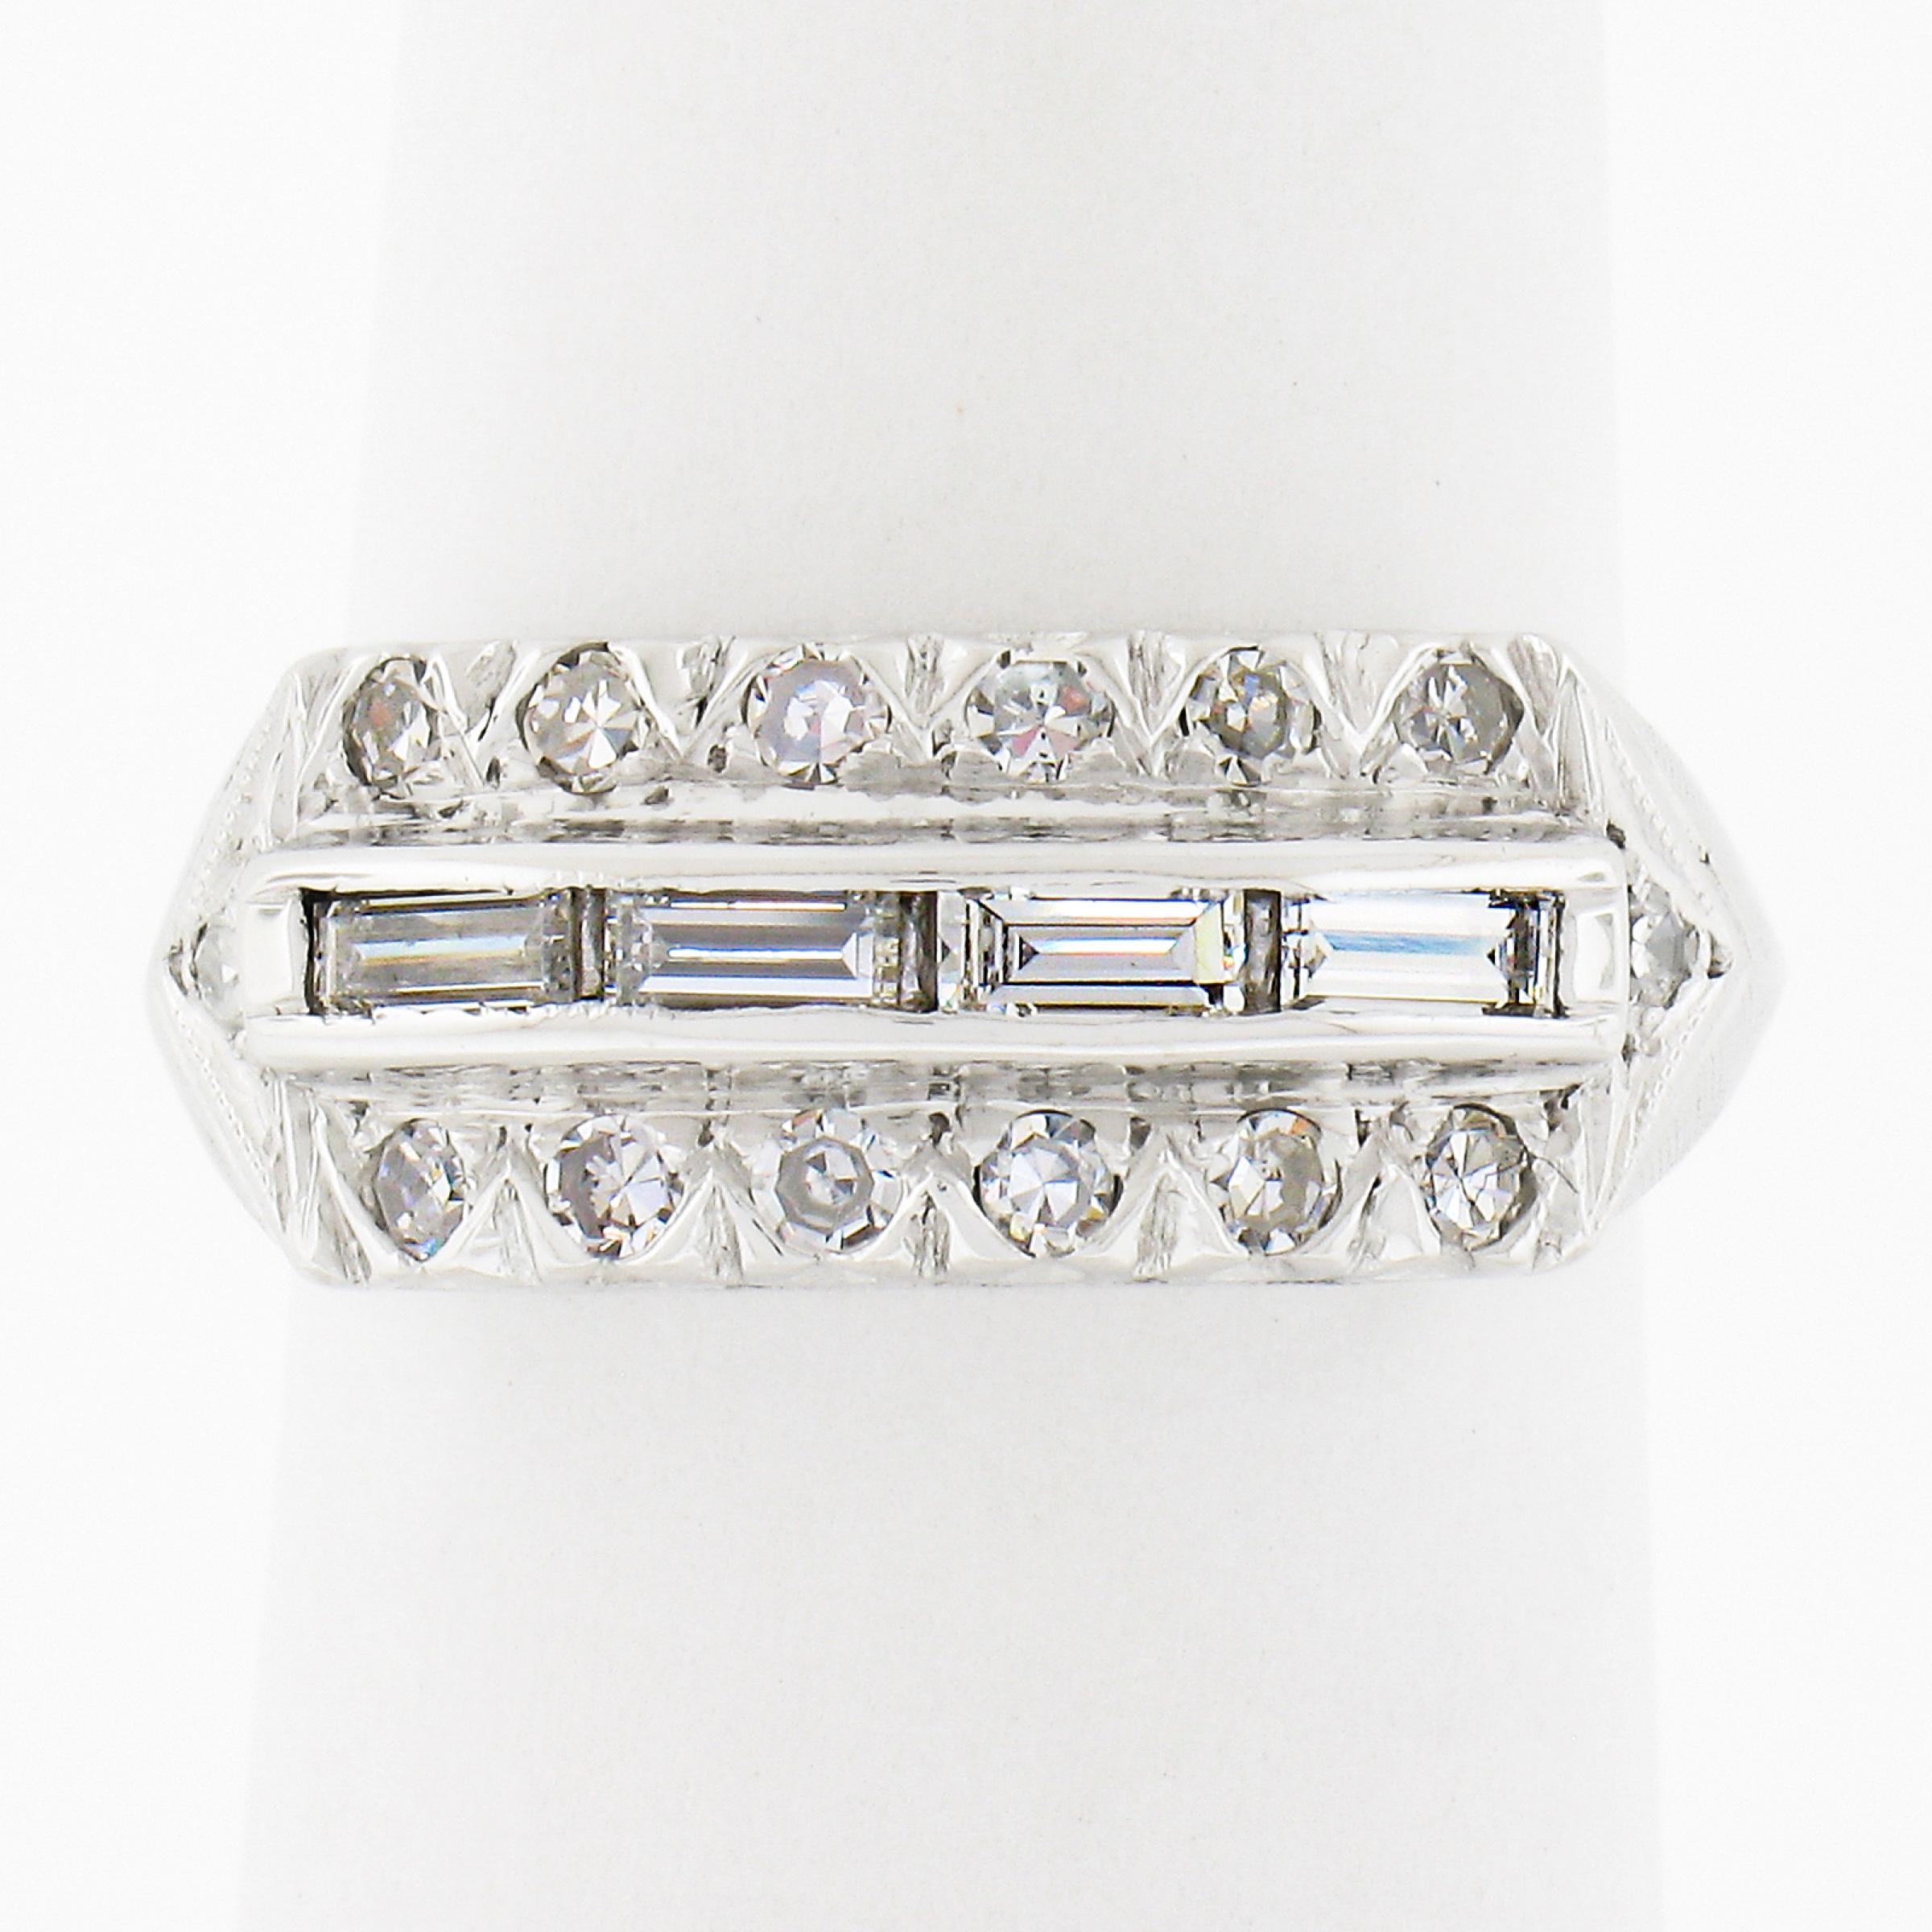 This here is an elegant vintage diamond band ring crafted in solid 14k white gold. The ring features approximately 0.42 carat of fine quality diamonds neatly set in three rows across its top. The center row features 4 straight baguette diamonds that